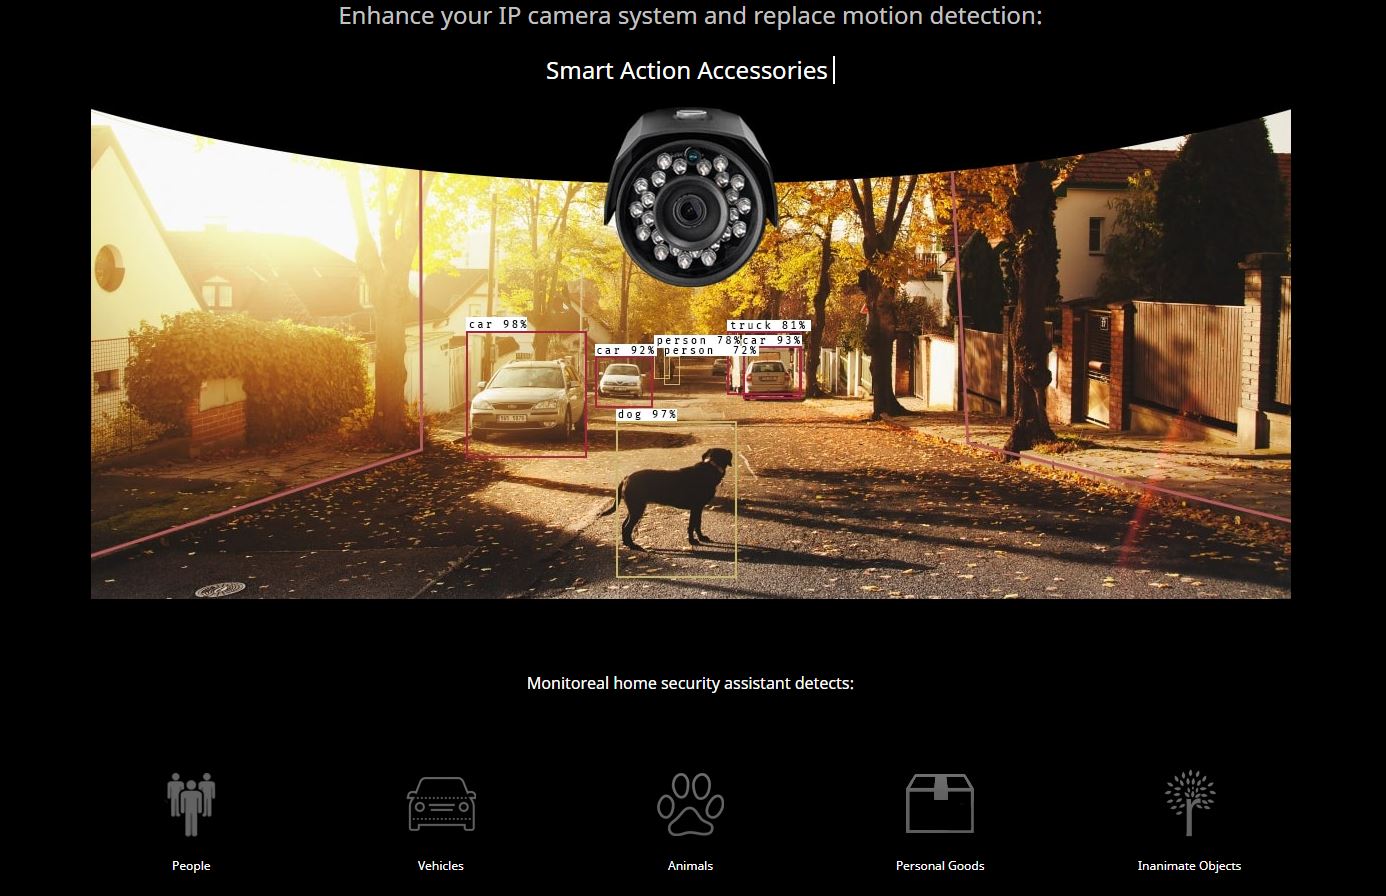 Monitoreal home security assistants detects People, Vehicles, Animals, Personal Goods, etc